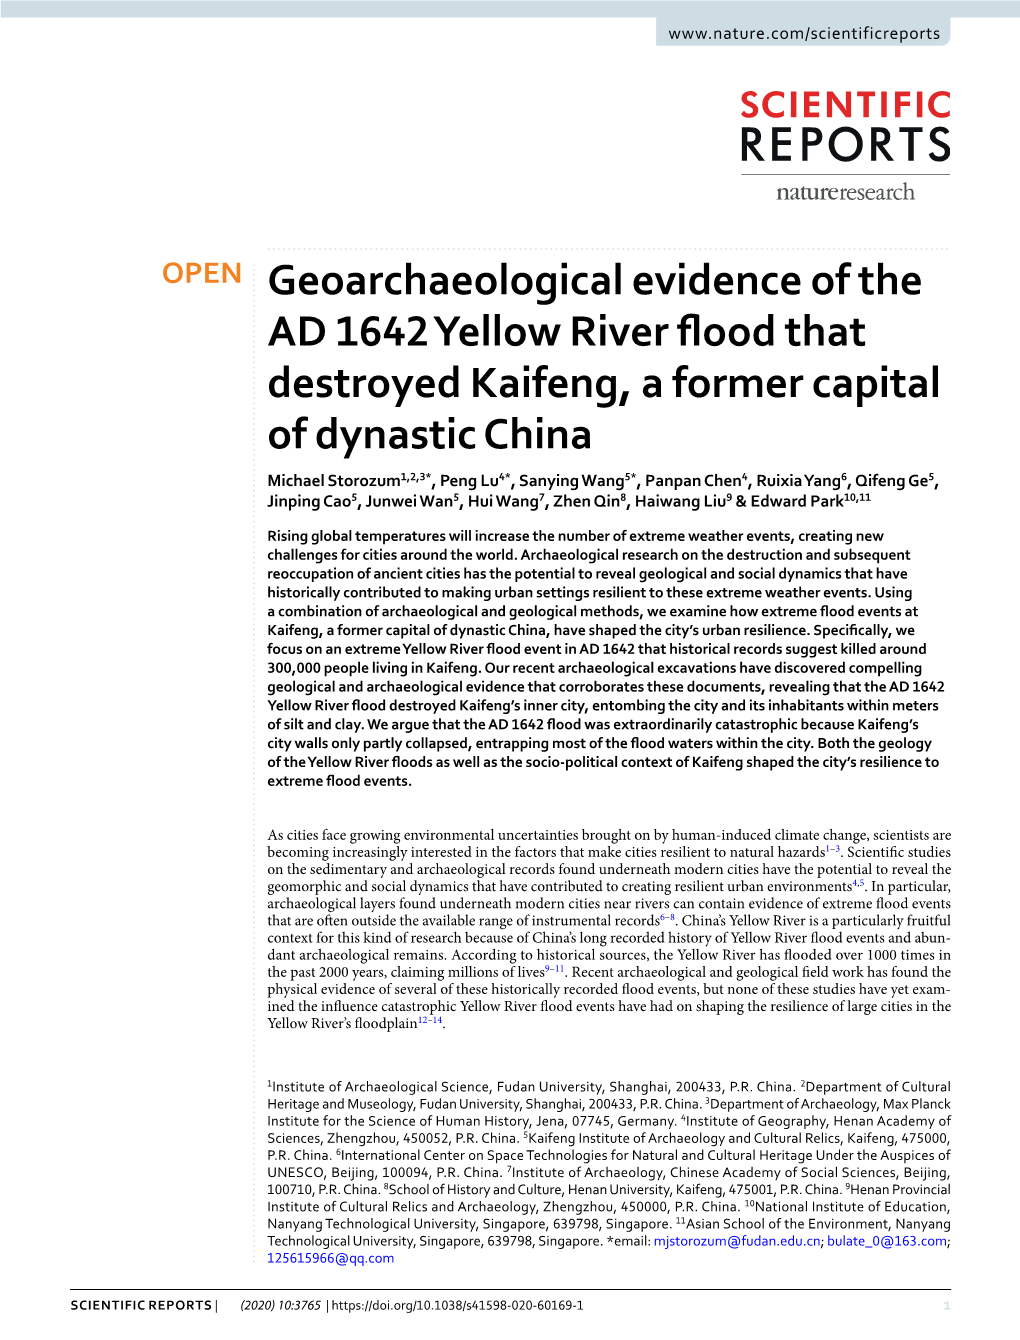 Geoarchaeological Evidence of the AD 1642 Yellow River